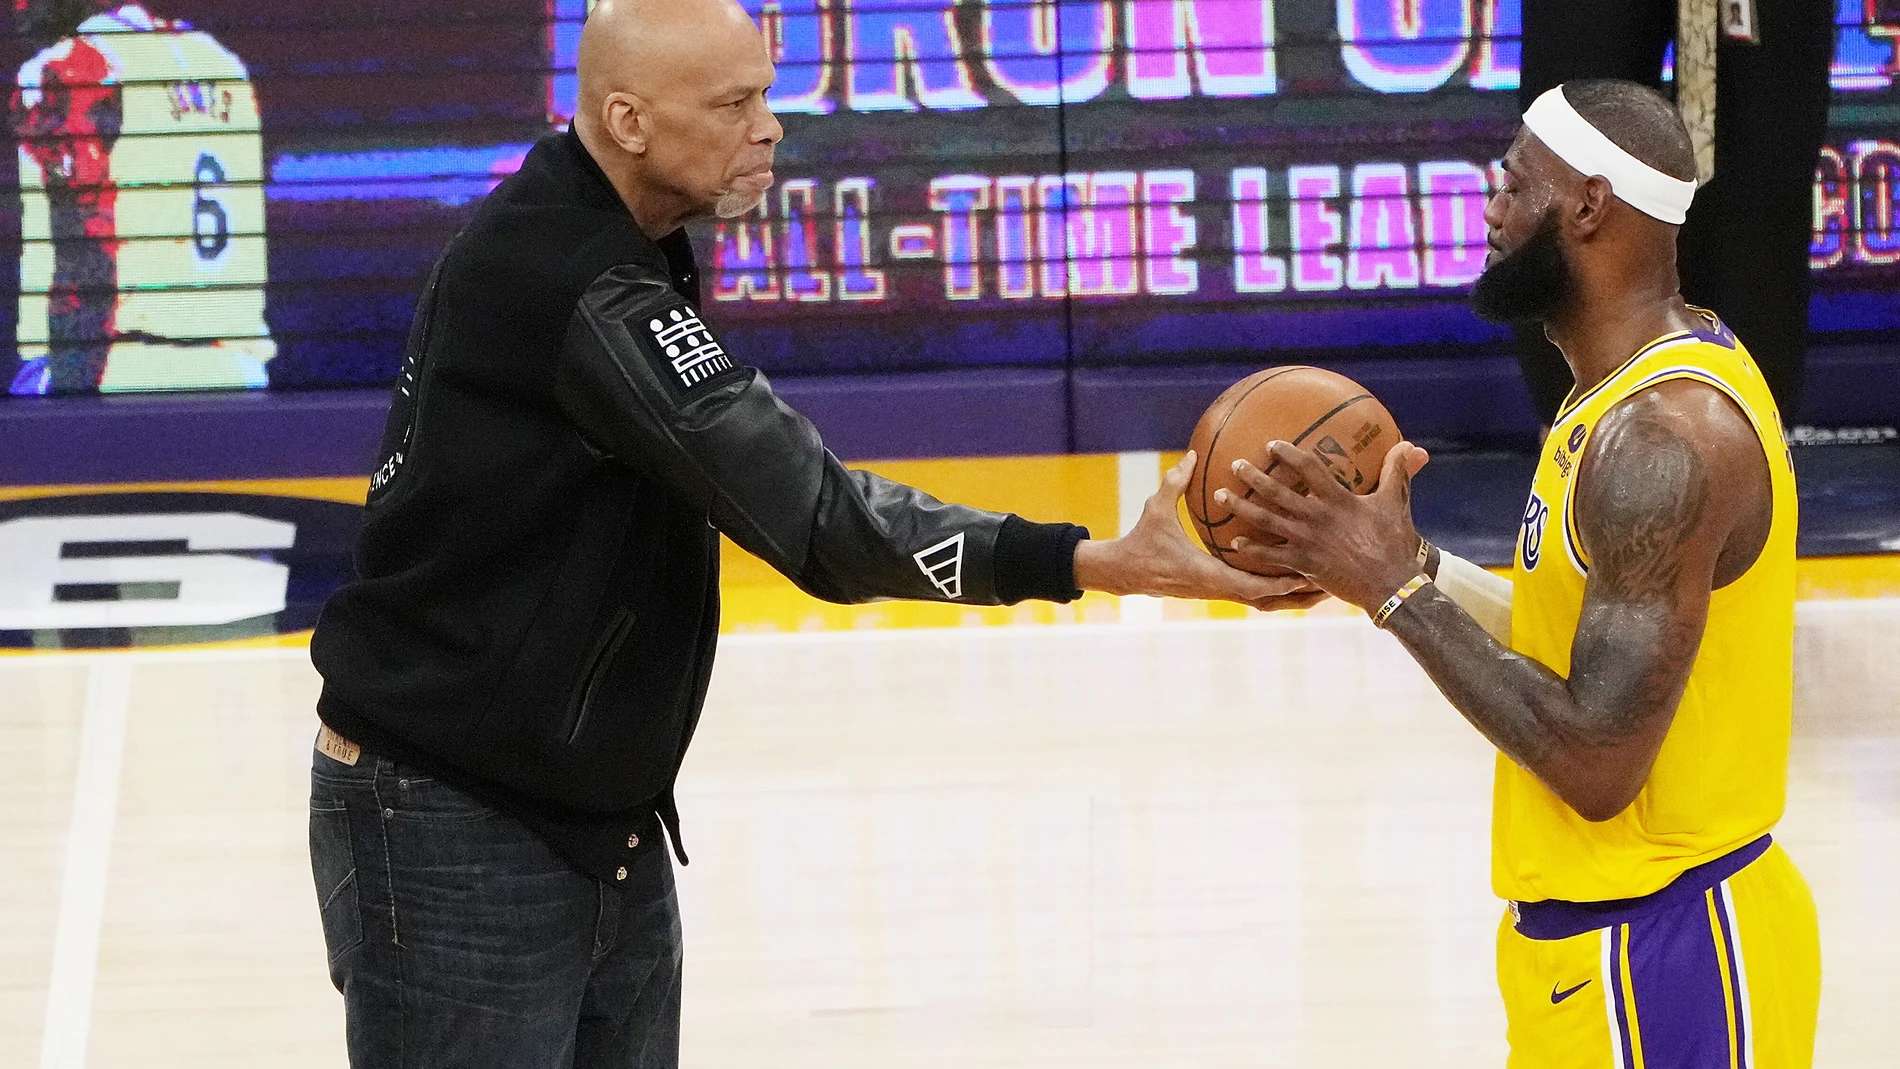 Los Angeles (United States), 08/02/2023.- Former NBA player Kareem Abdul-Jabbar (L) presents Los Angeles Lakers forward LeBron James (R) with his scoring basketball after becoming the all time highest scoring player in NBA history during the second half of the NBA basketball game between the Los Angeles Lakers and Oklahoma City Thunder at the Crypto.com Arena in Los Angeles, California, USA, 07 February 2023. Kareem Abdul-Jabbar is the former highest scoring player in NBA history. (Baloncesto, Estados Unidos) EFE/EPA/ALLISON DINNER SHUTTERSTOCK OUT